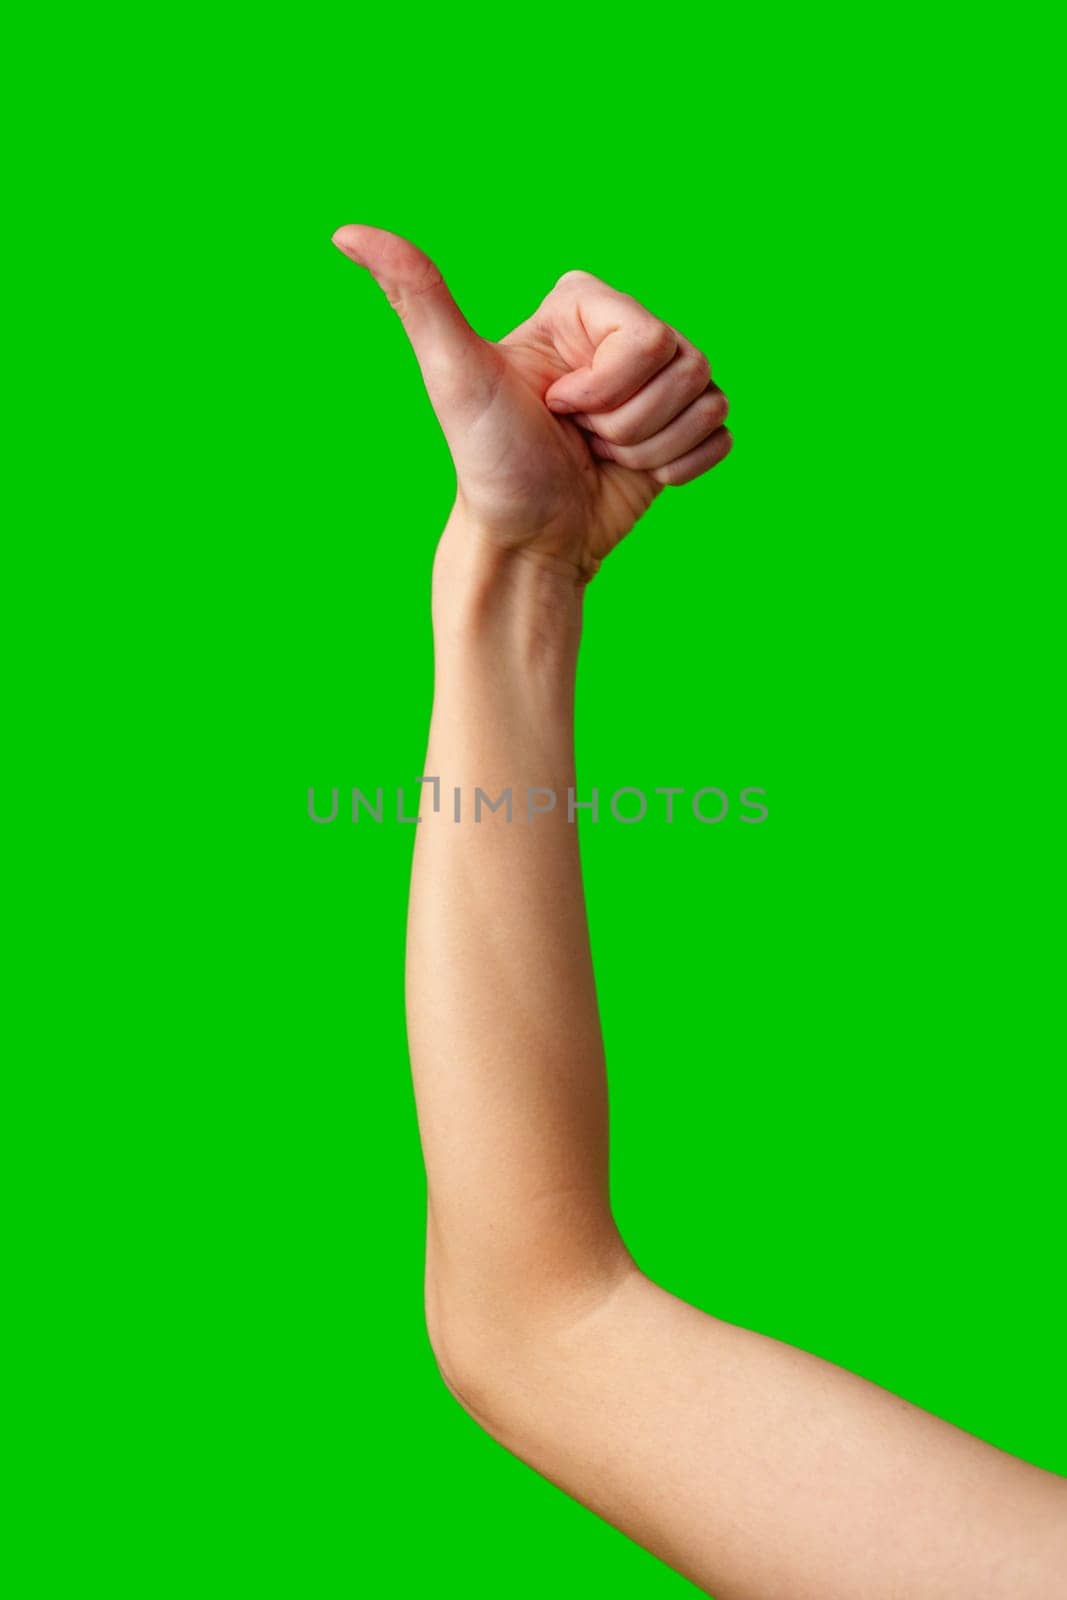 Person Giving a Thumbs Up Gesture Against a Green Screen Background by Fabrikasimf